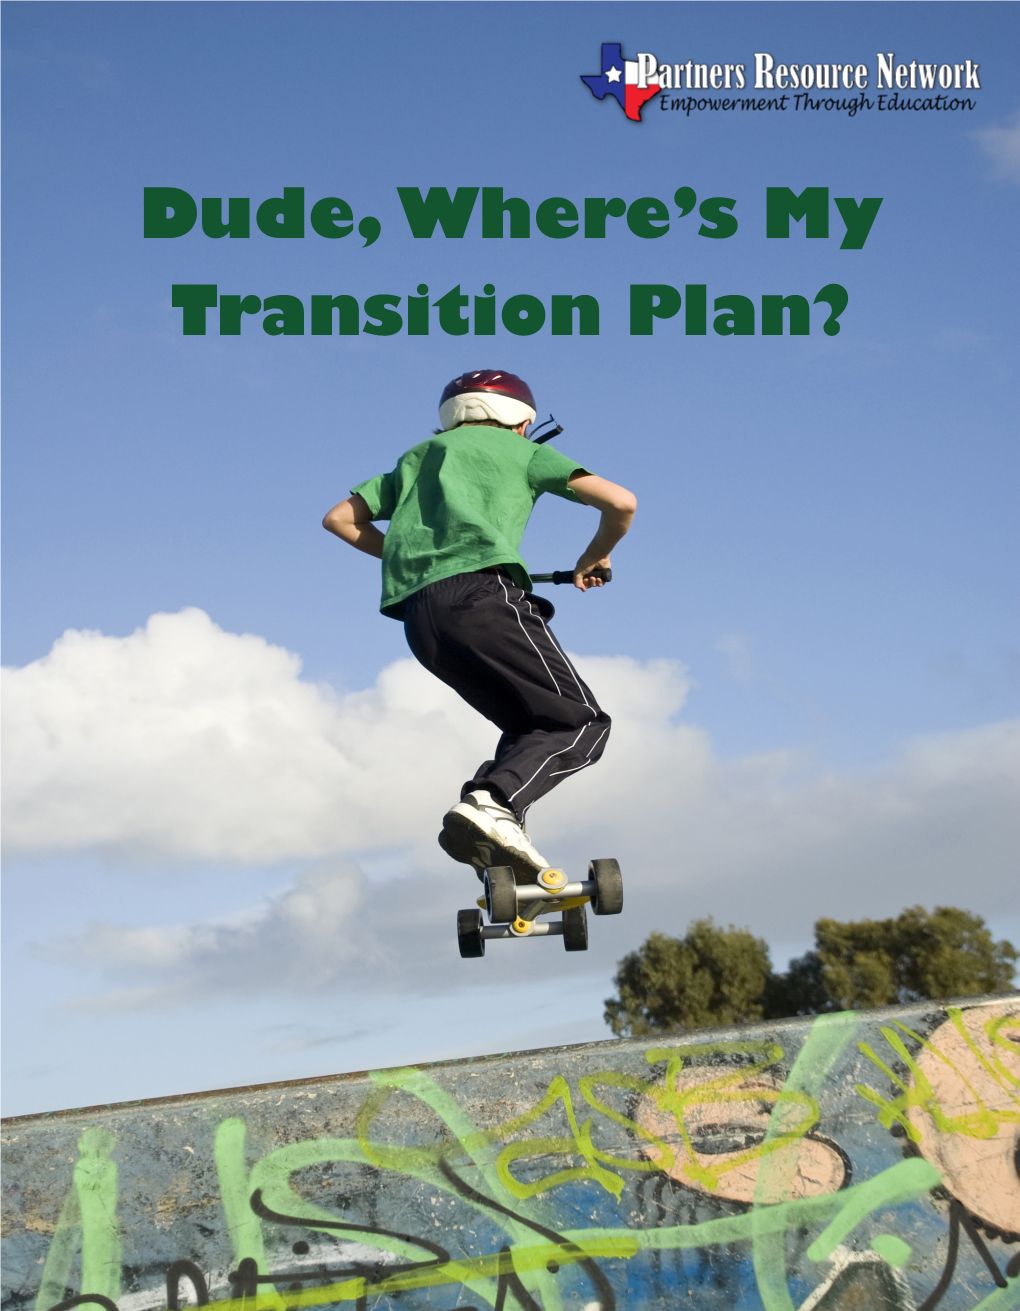 Dude, Where's My Transition Plan?